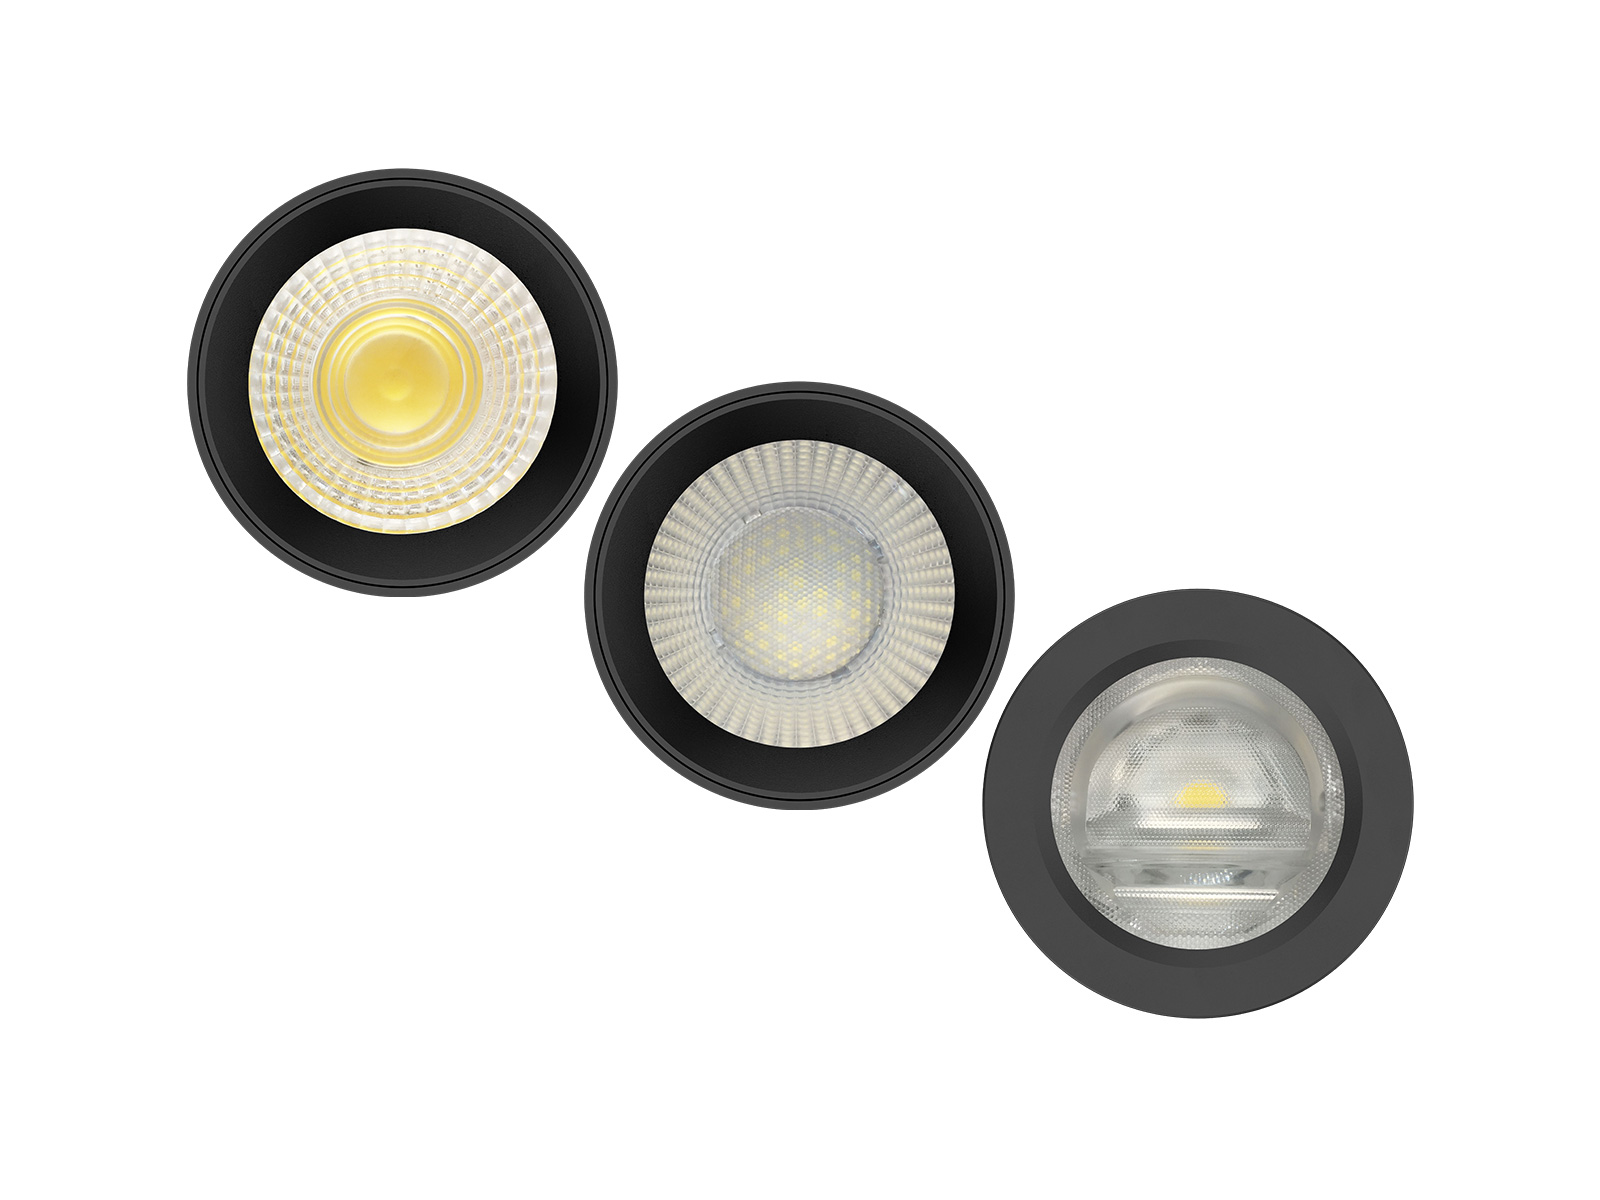 DL277 black fire rated led outside downlights